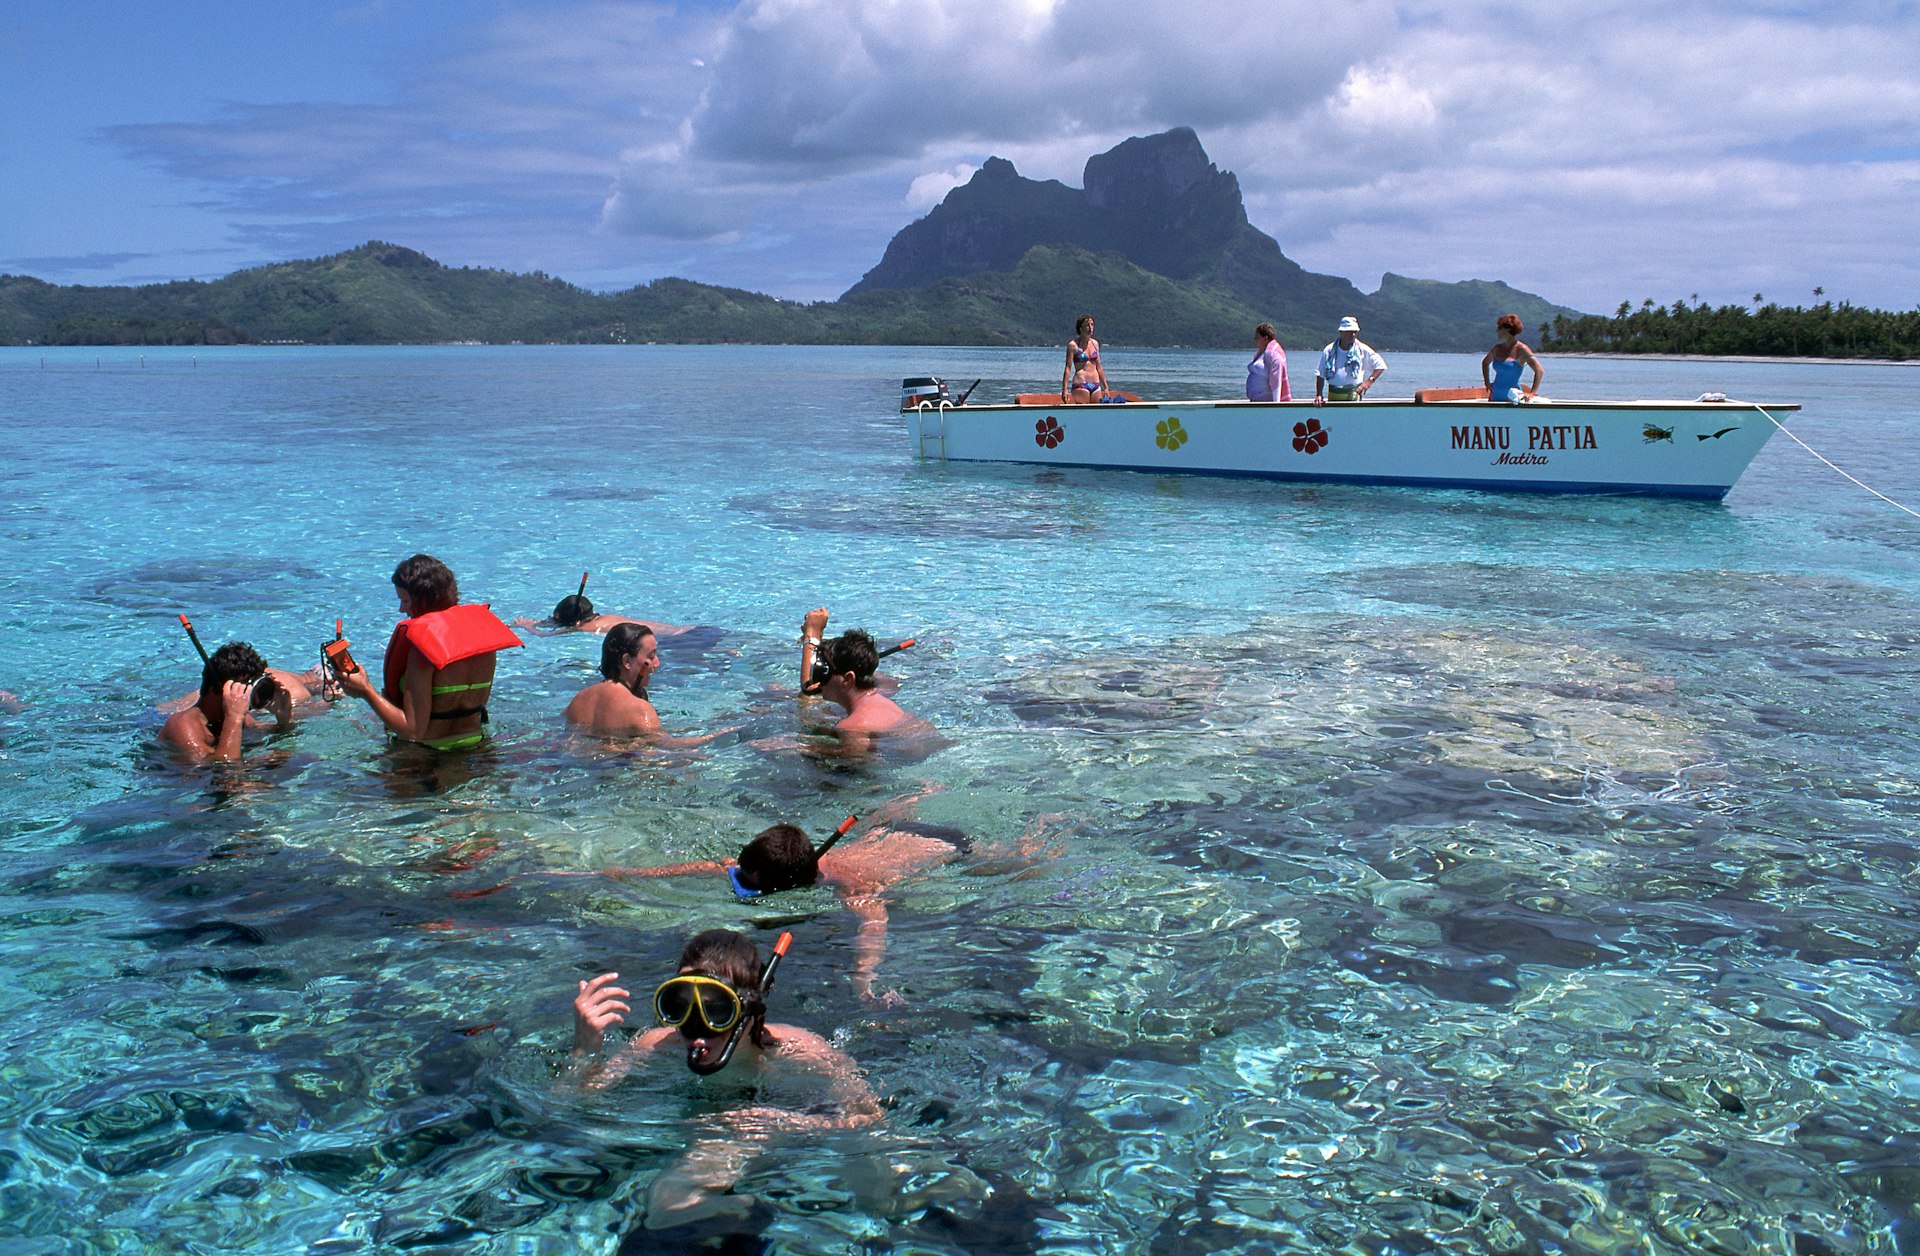 A group of people snorkeling in shallow water near a boat in Bora Bora